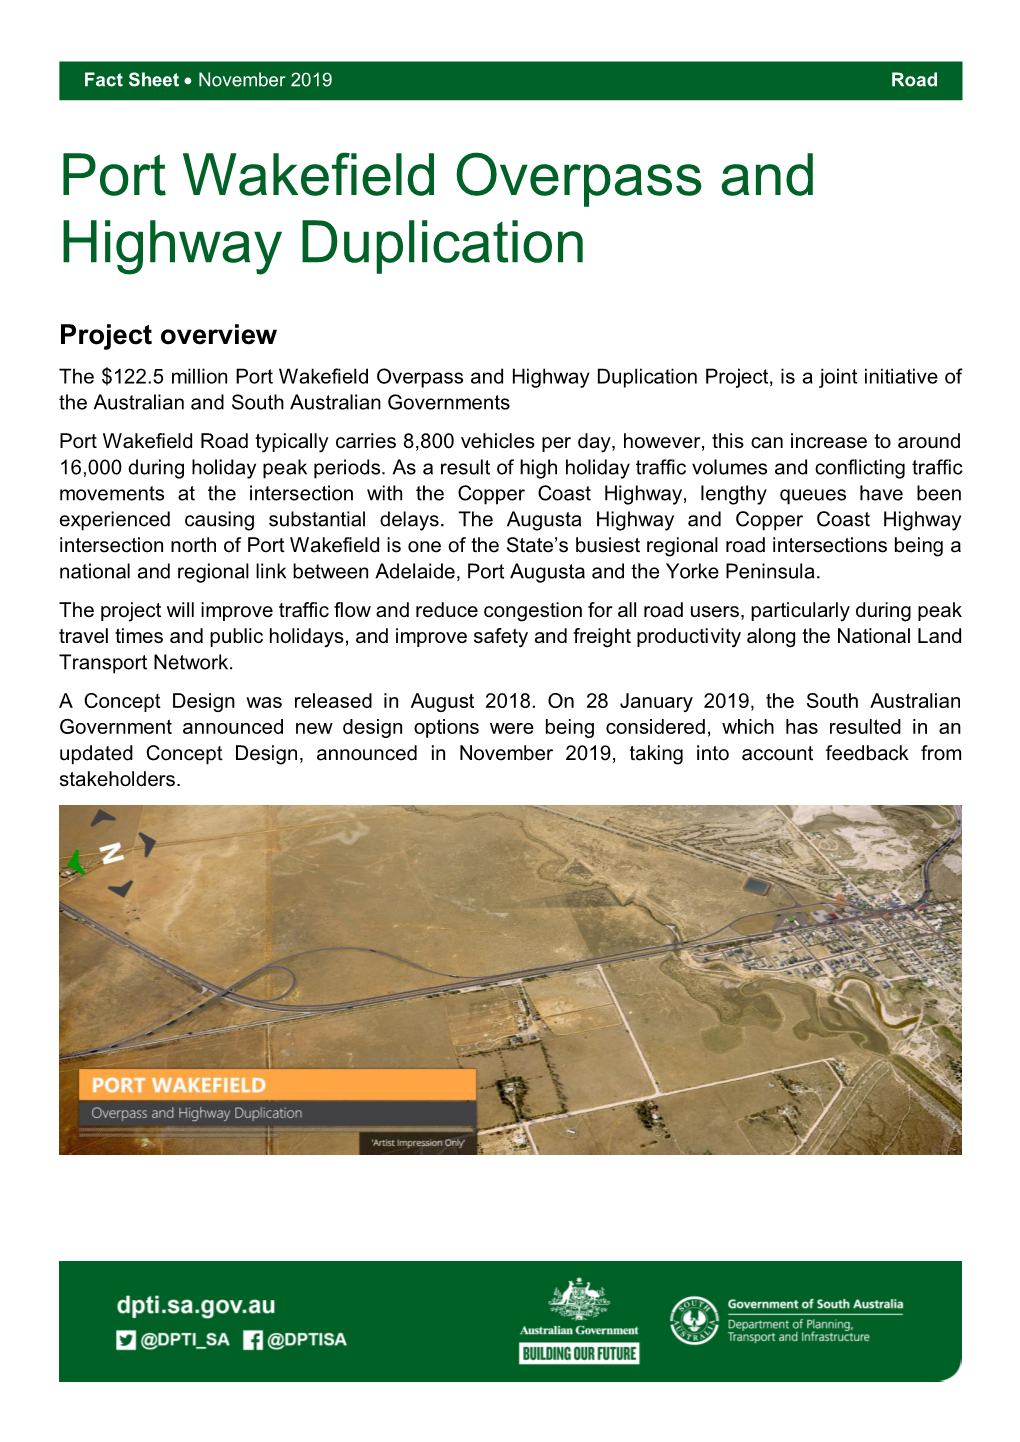 Port Wakefield Overpass and Highway Duplication